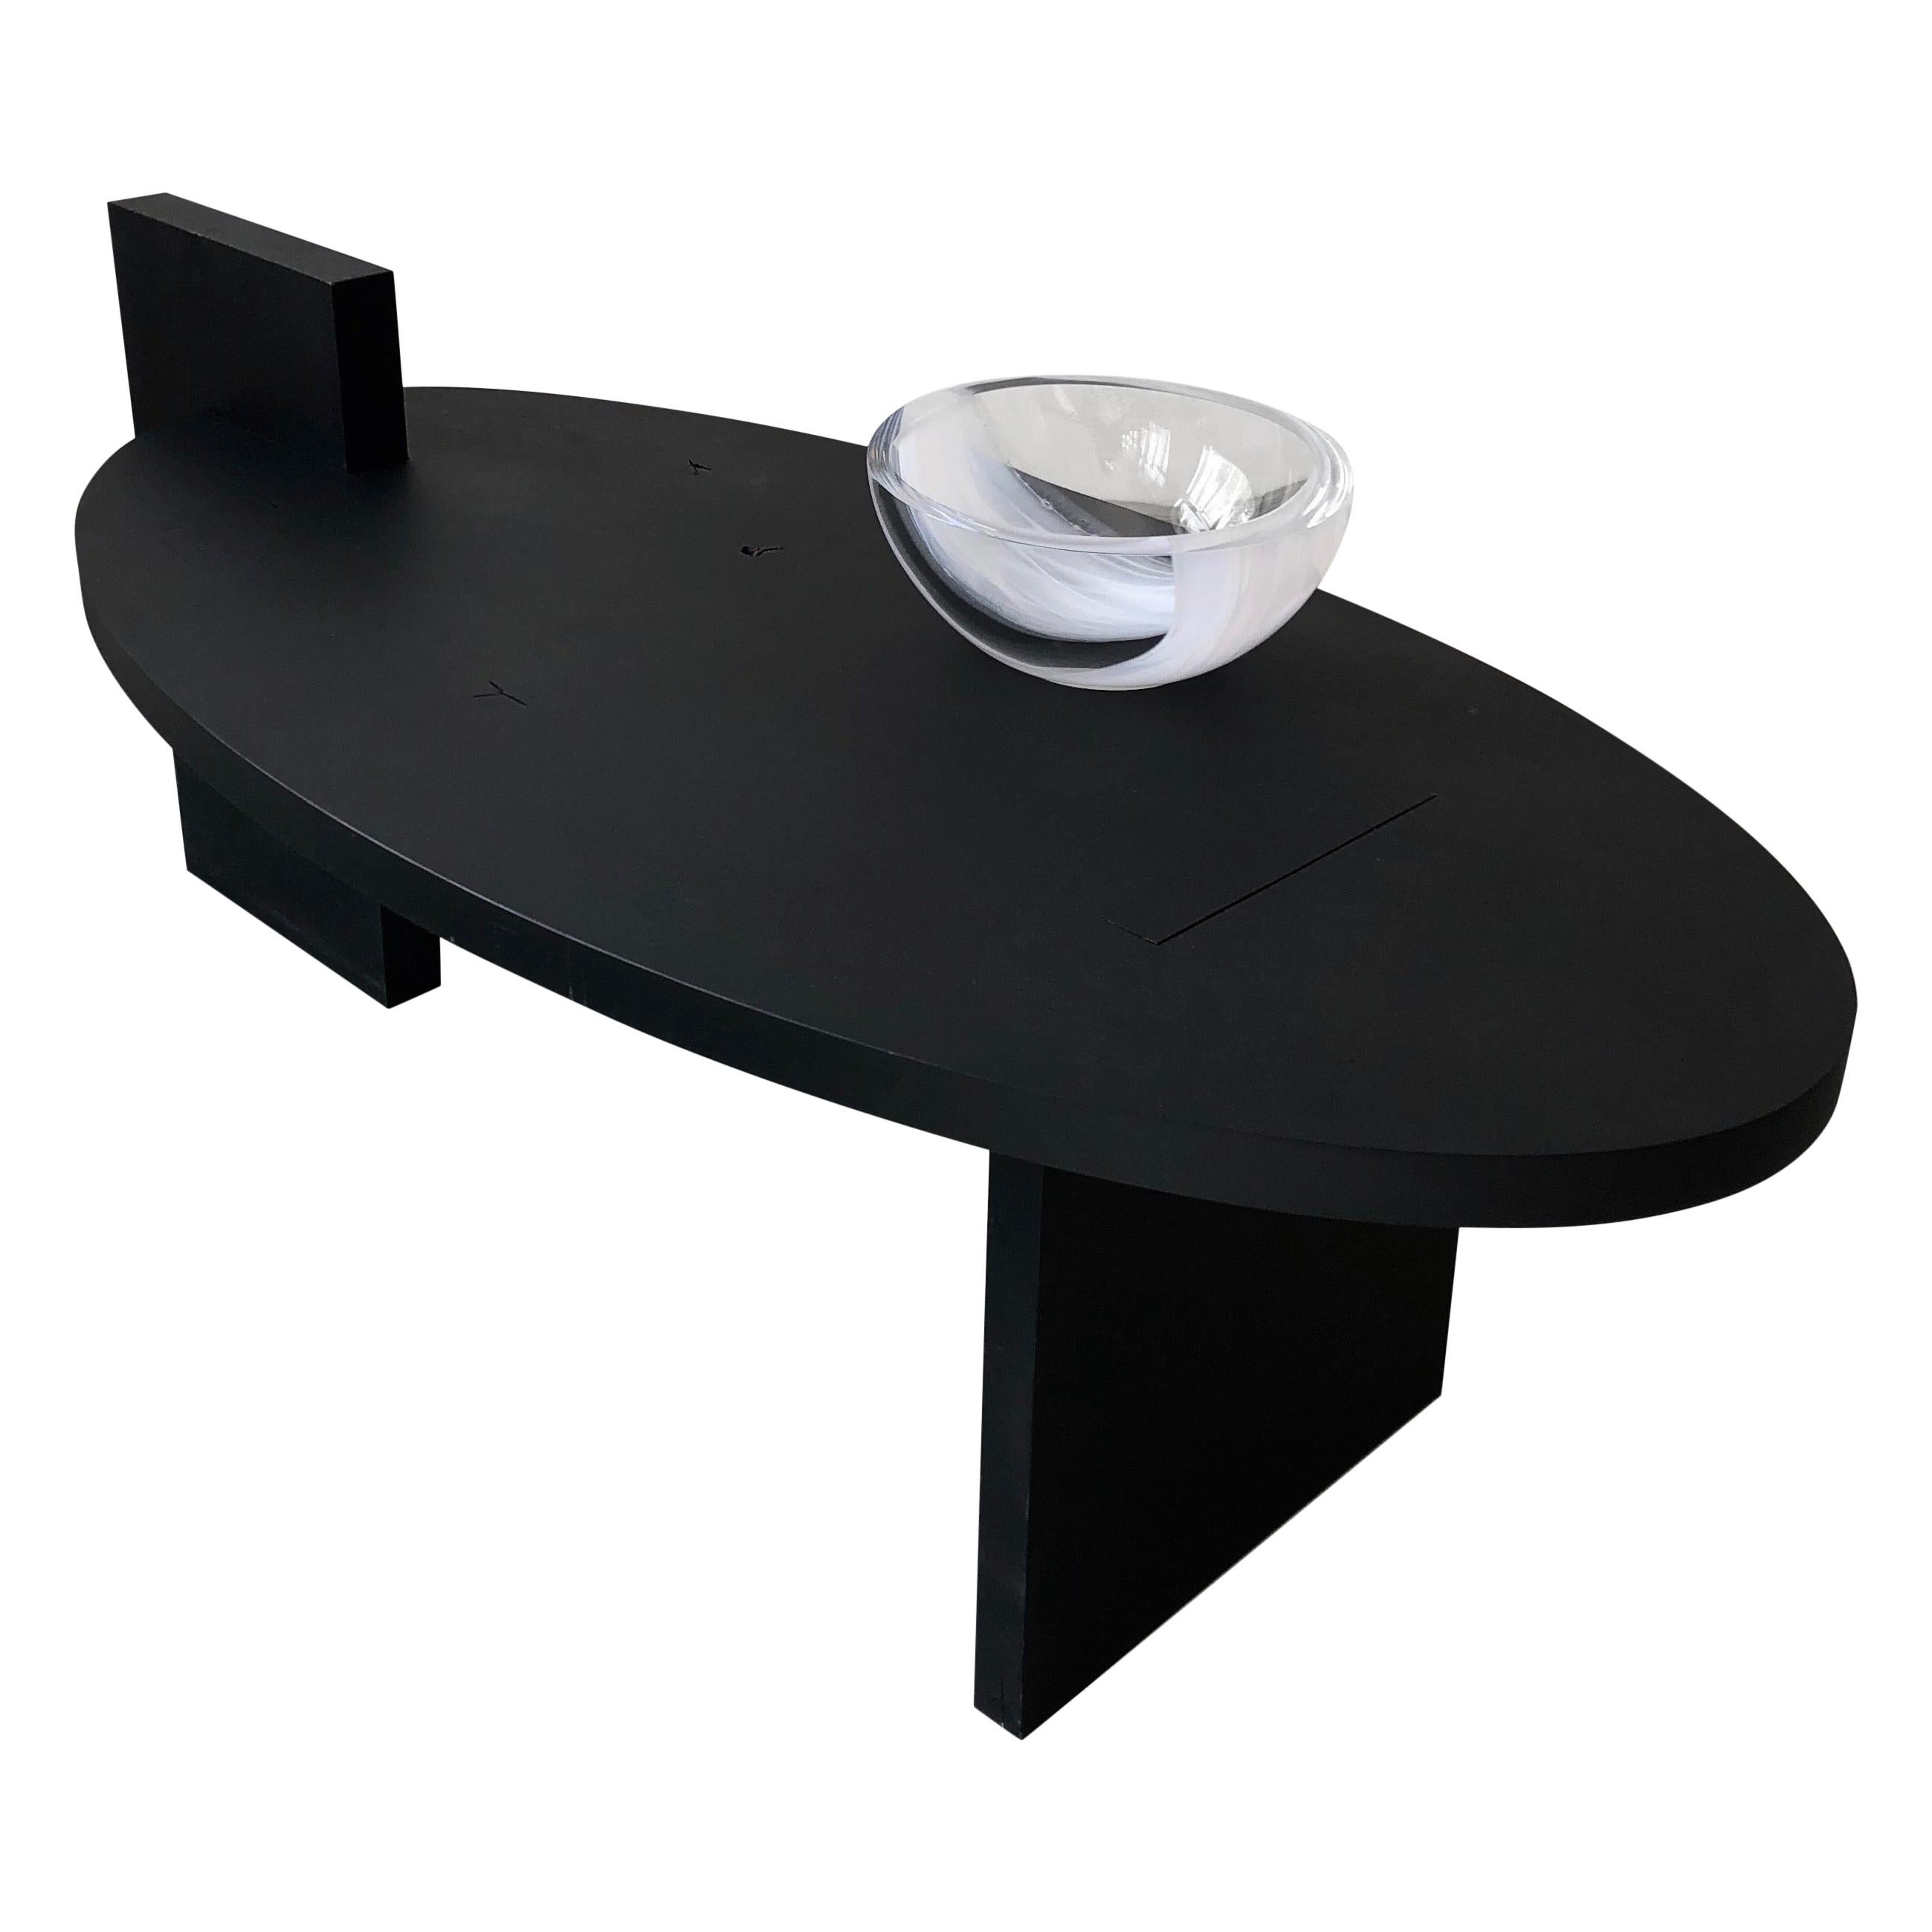 'Black Lotus' Oval Coffee Table with glass element  by Experimental